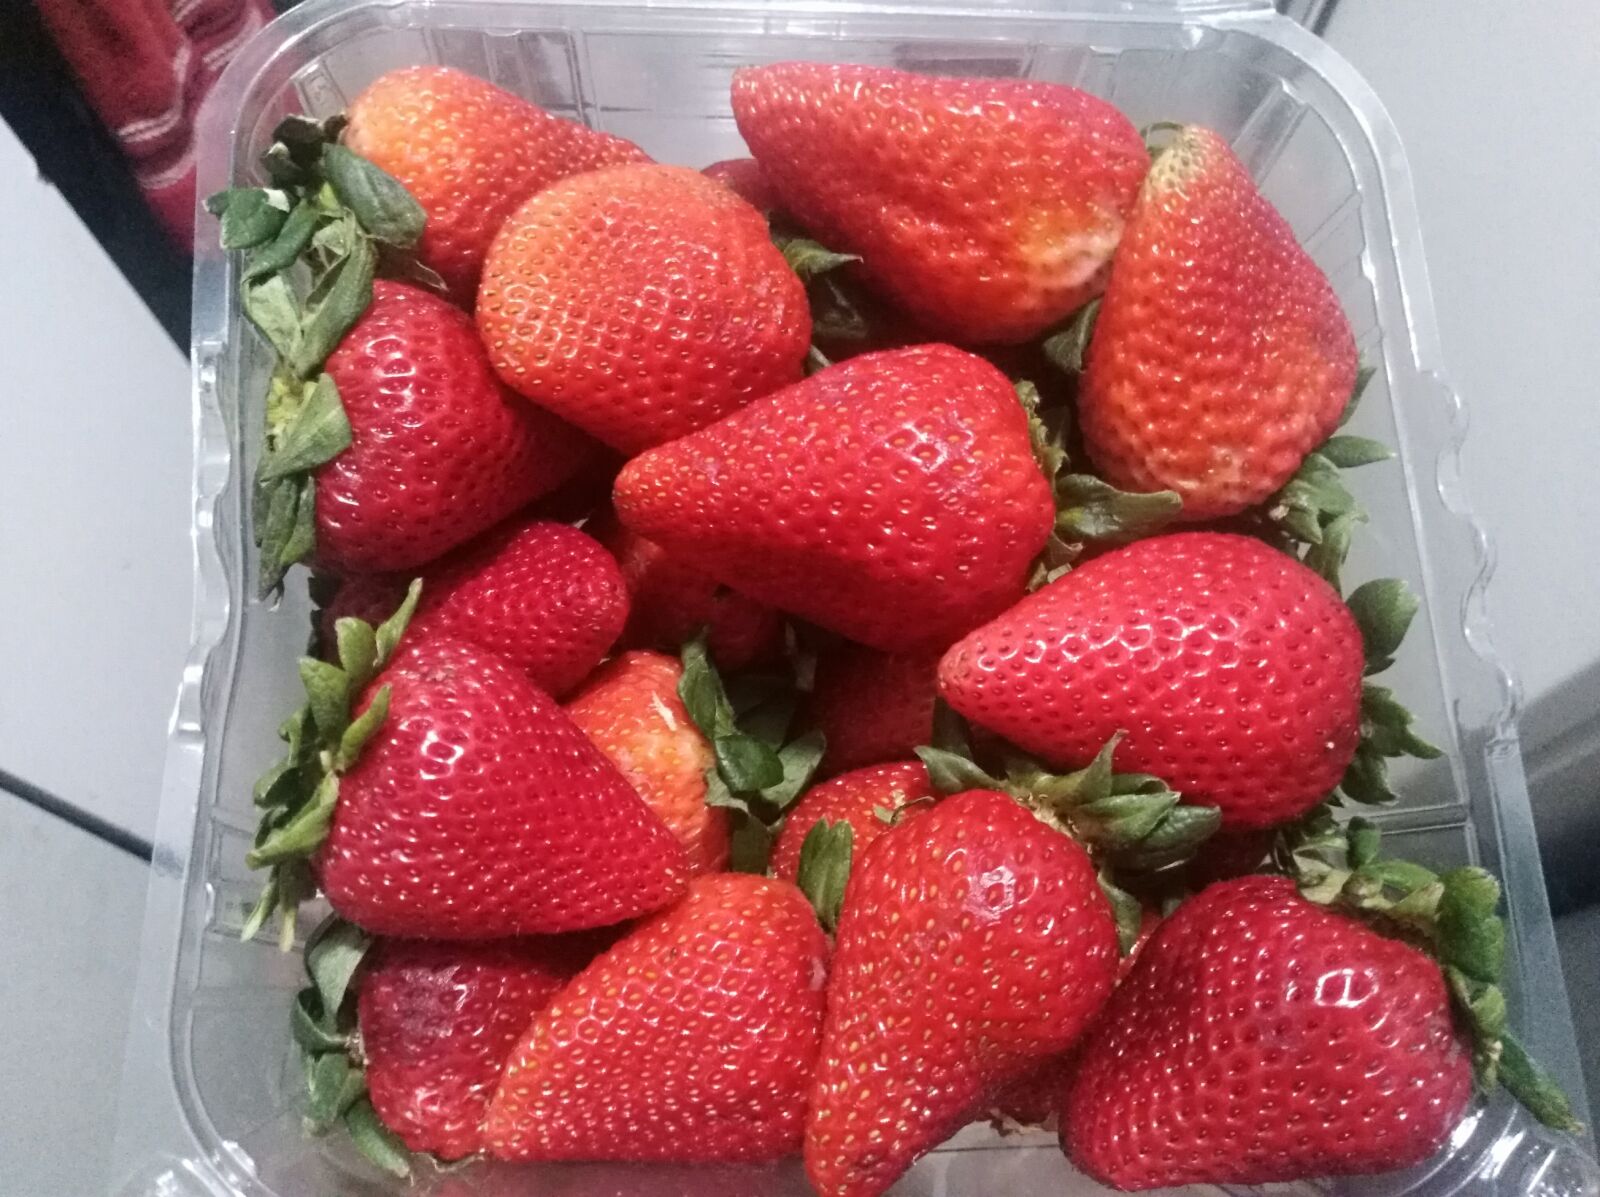 HUAWEI Y7 sample photo. Strawberries, harvest, fruit photography